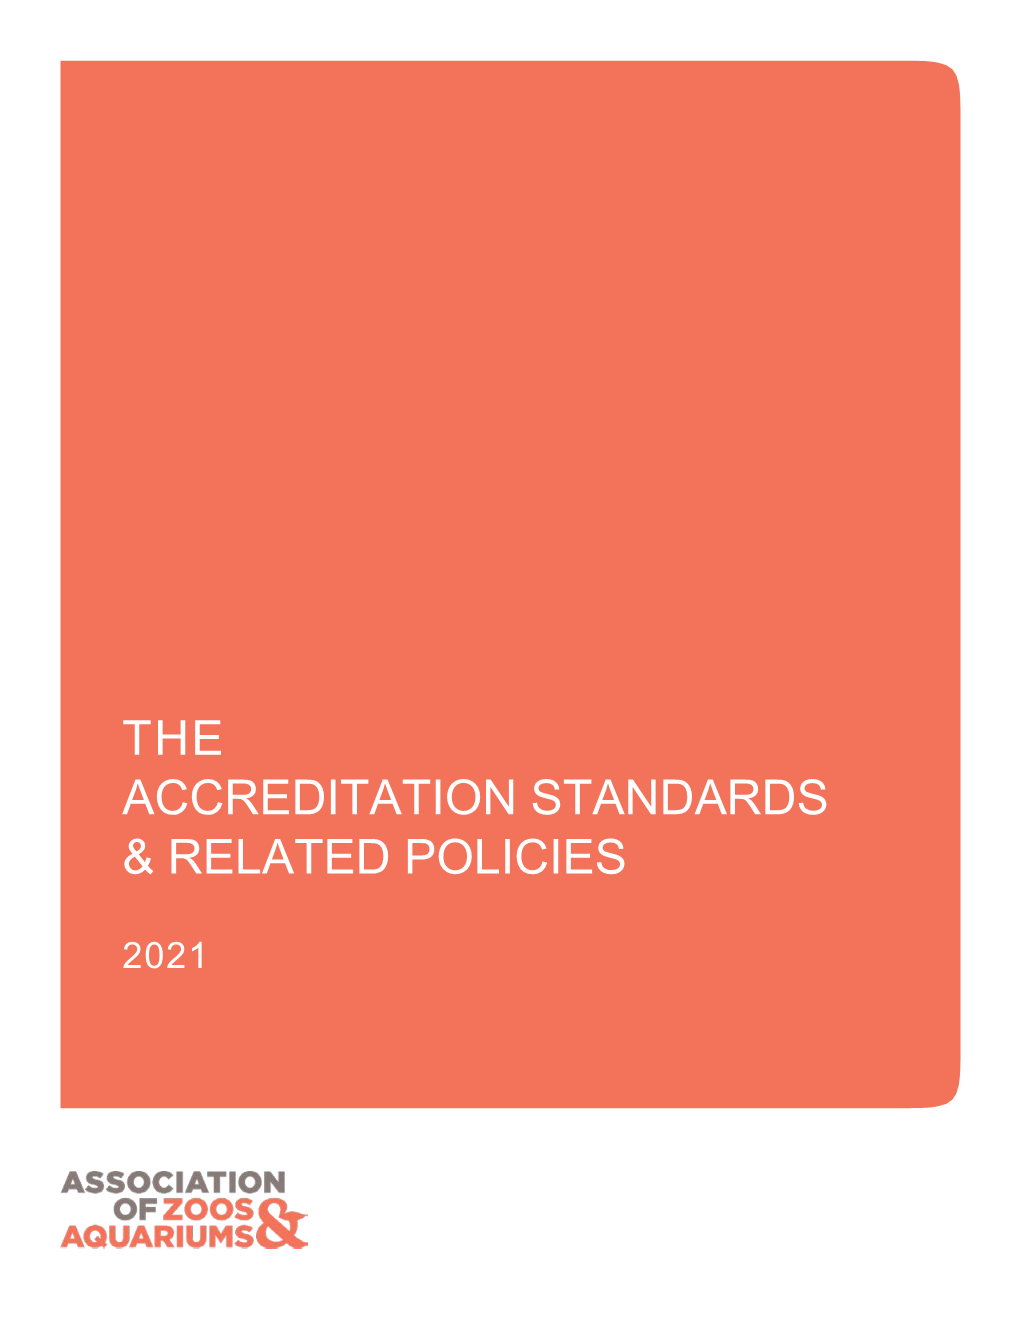 The Accreditation Standards & Related Policies